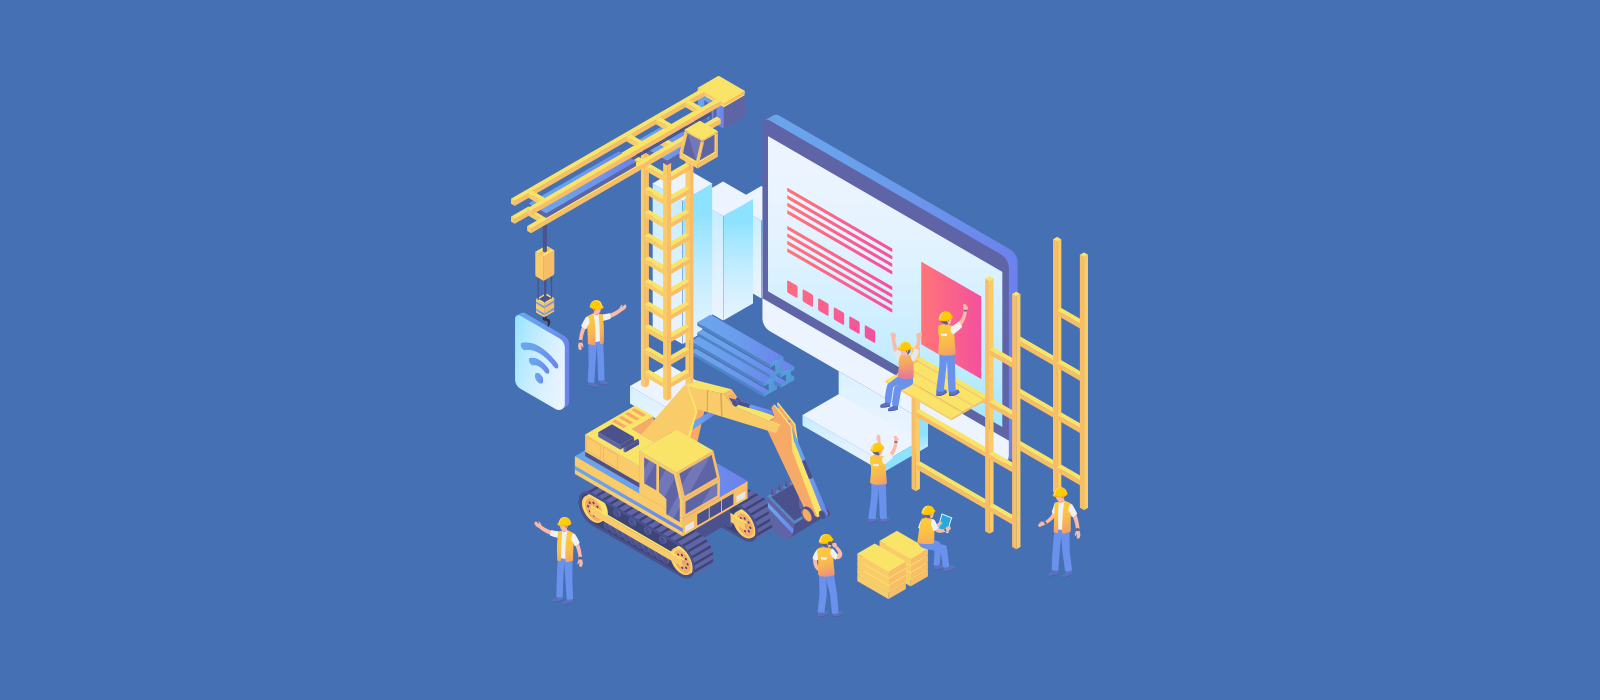 The Ultimate Guide to Site Structure